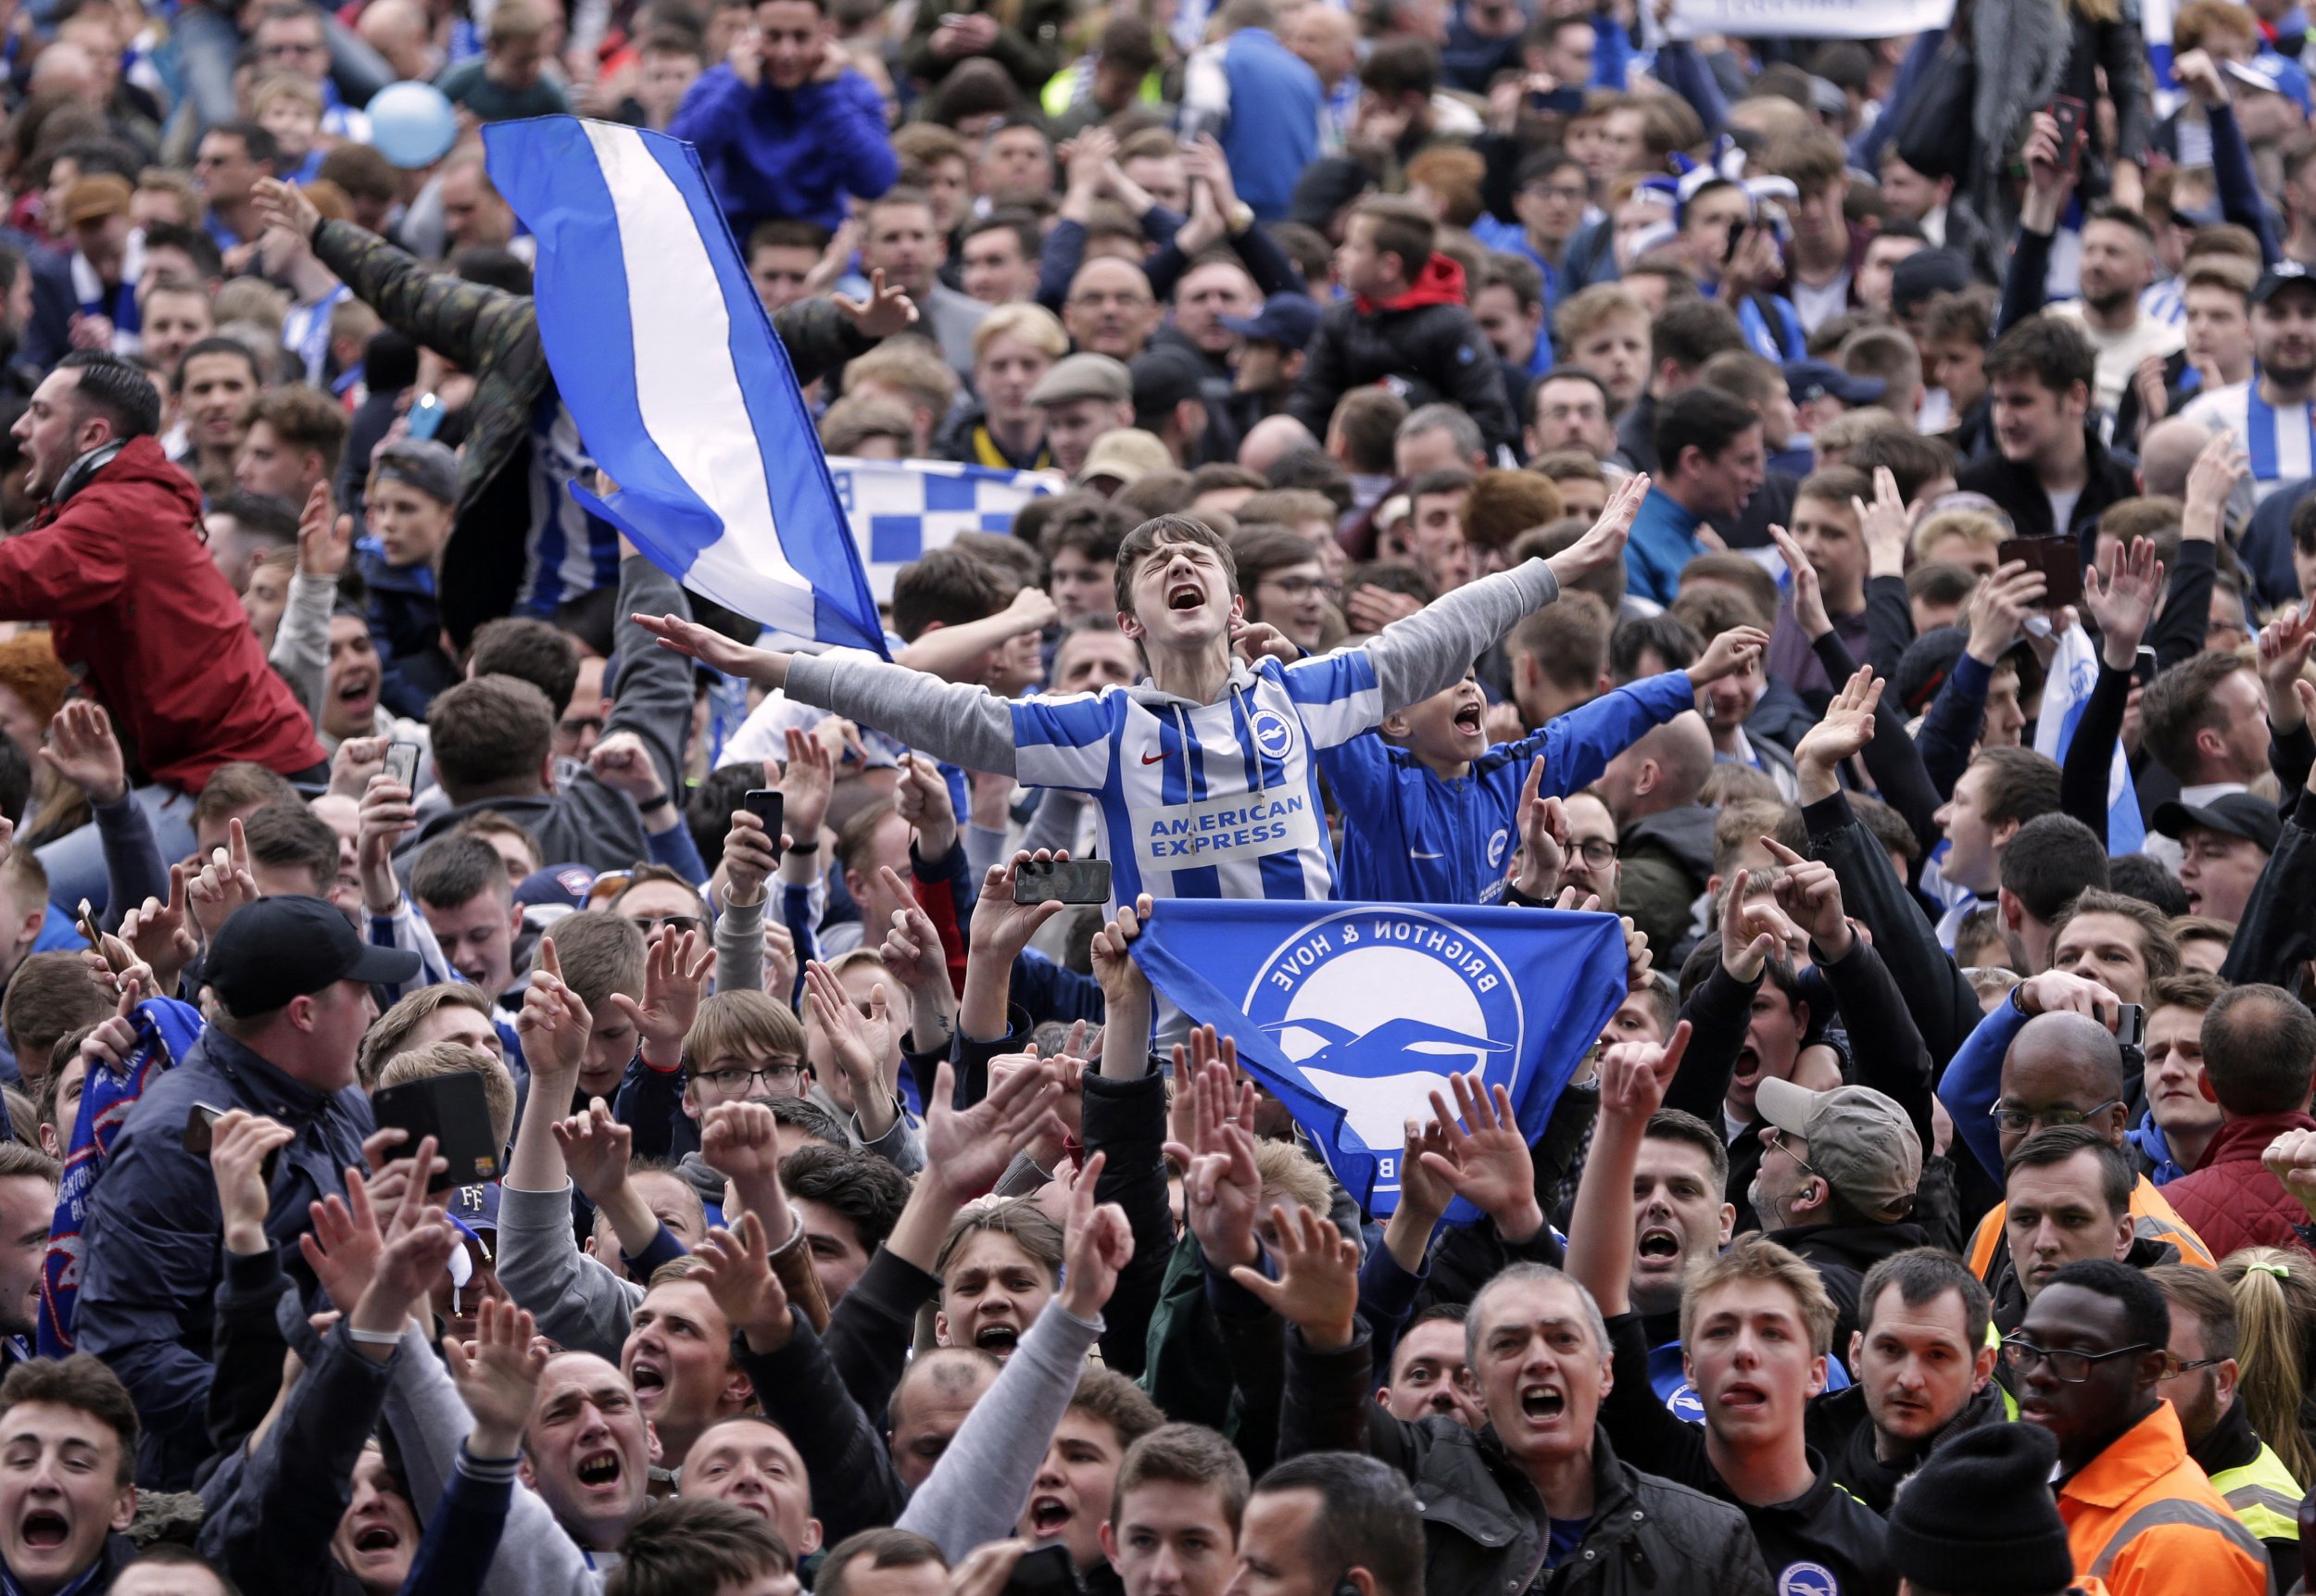 Brighton offers their fans something to enjoy (Source: Newsweek)